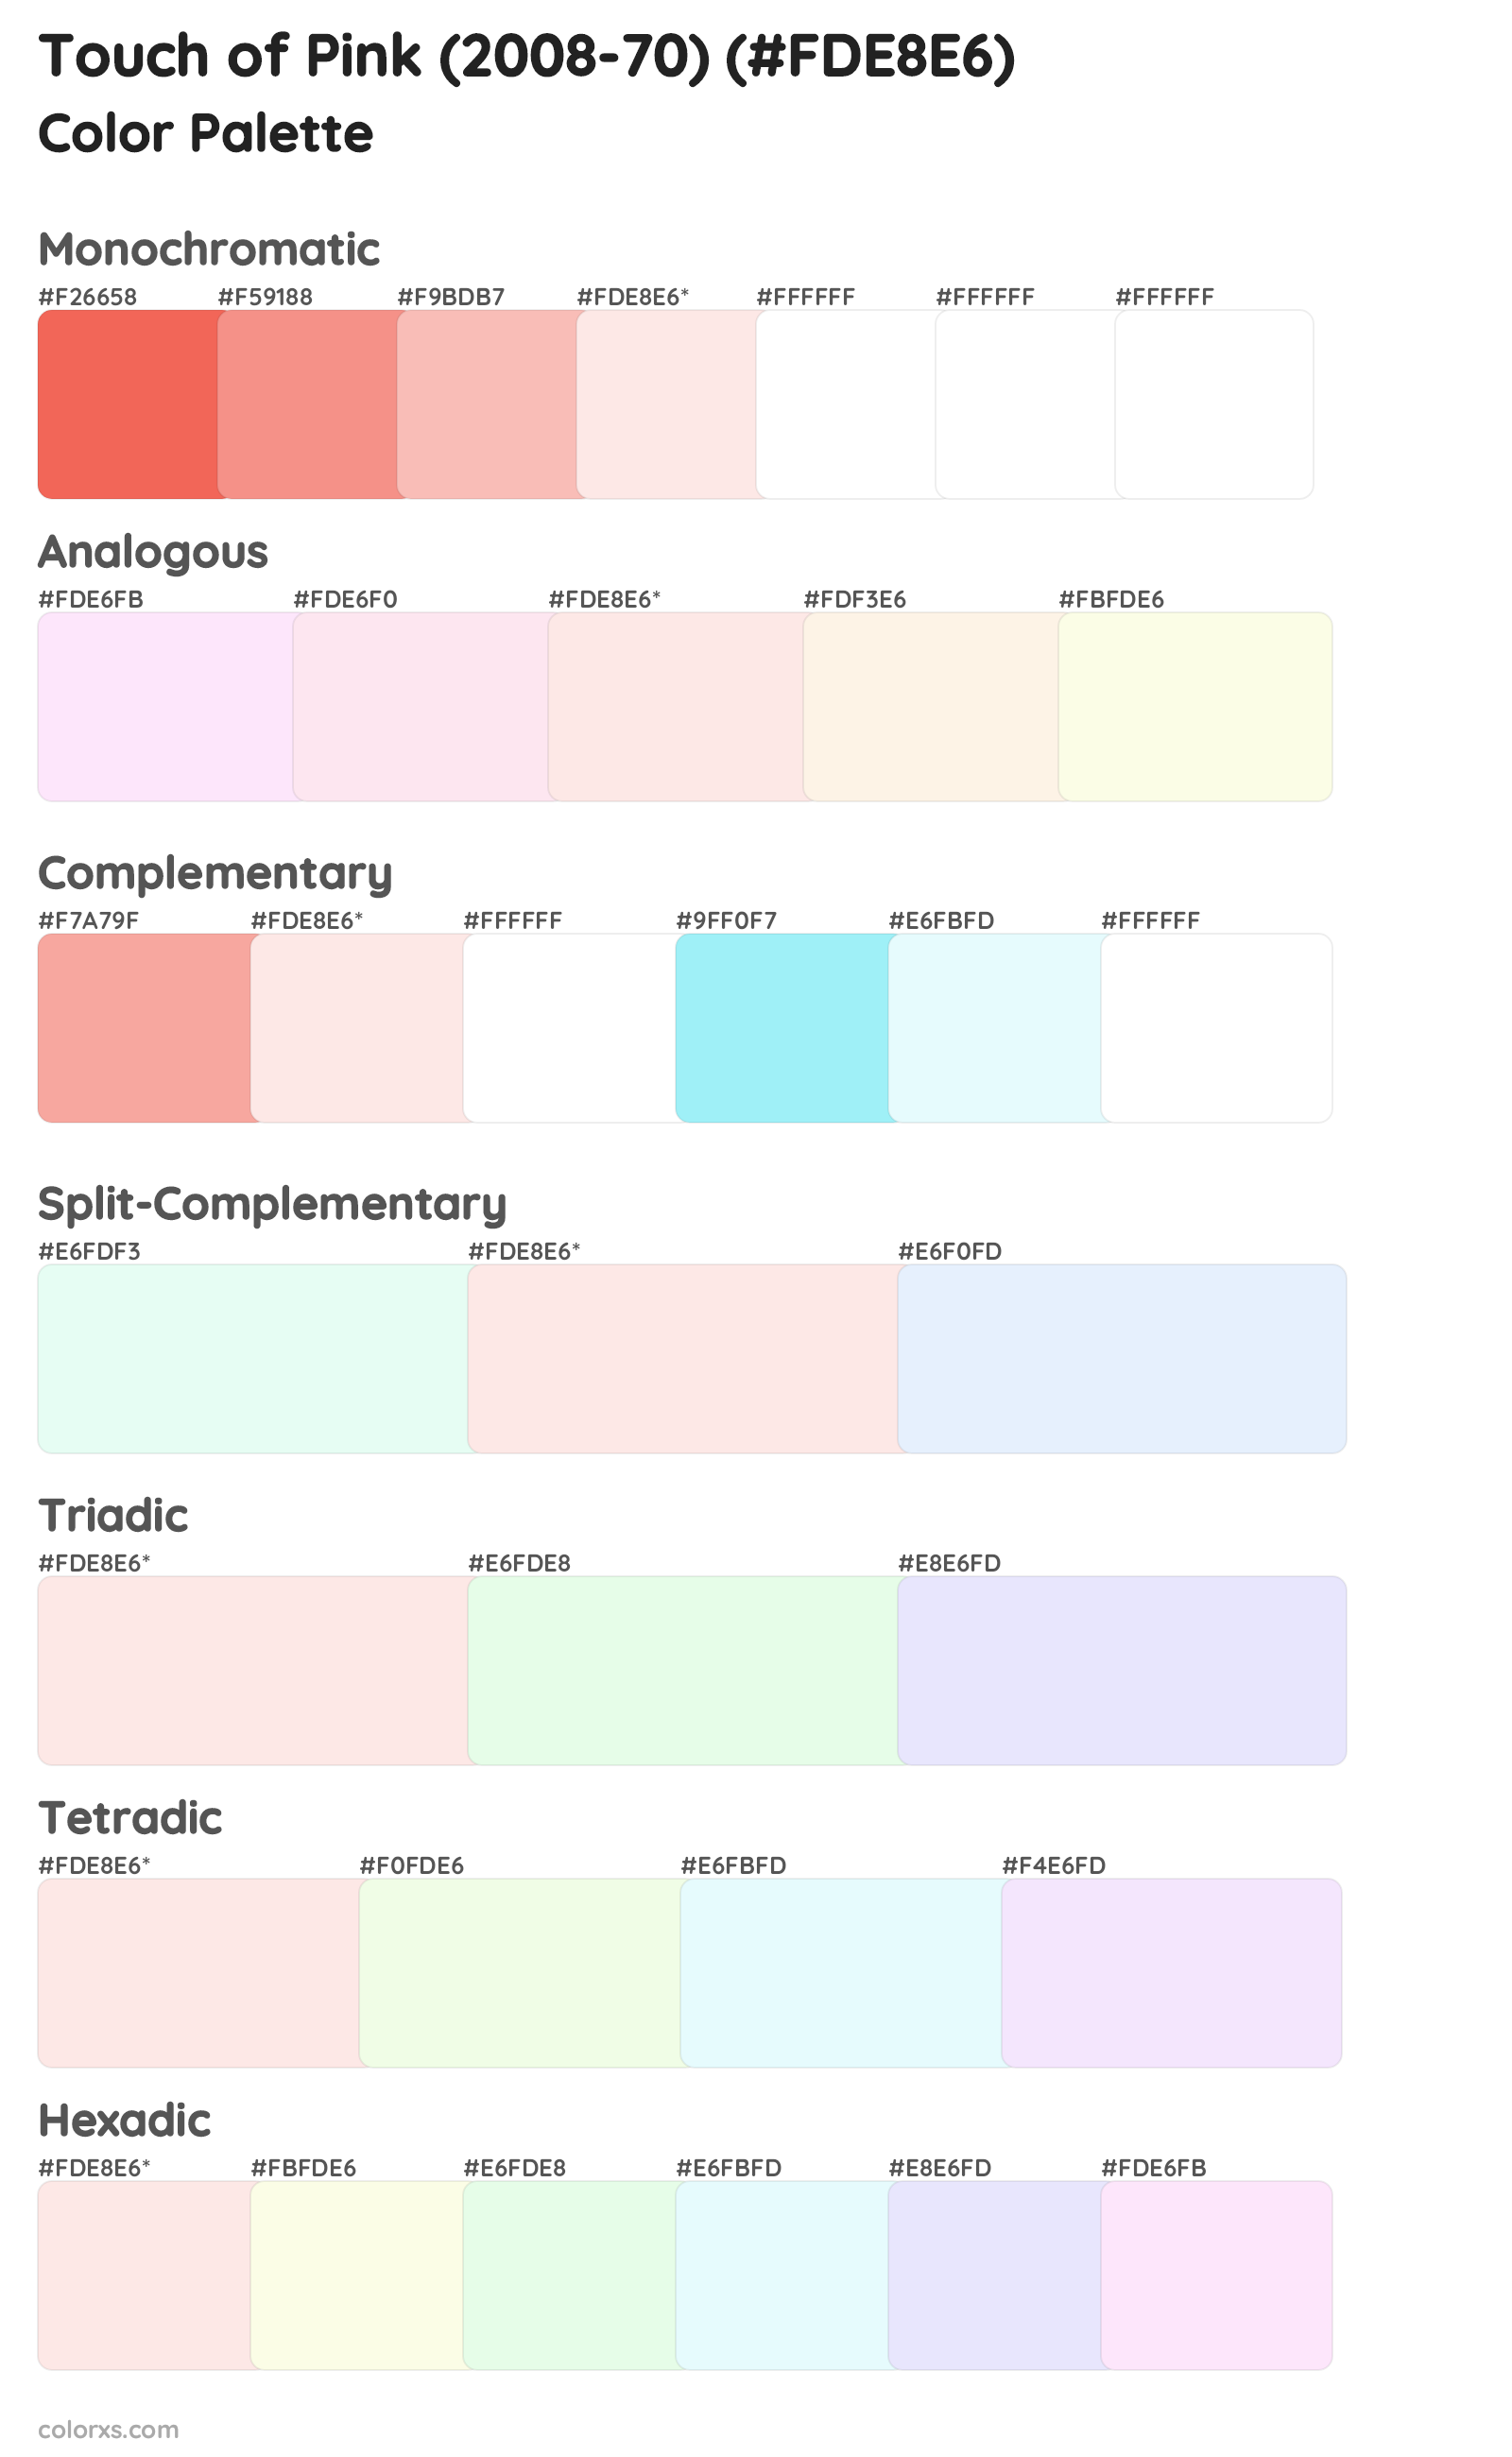 Touch of Pink (2008-70) Color Scheme Palettes